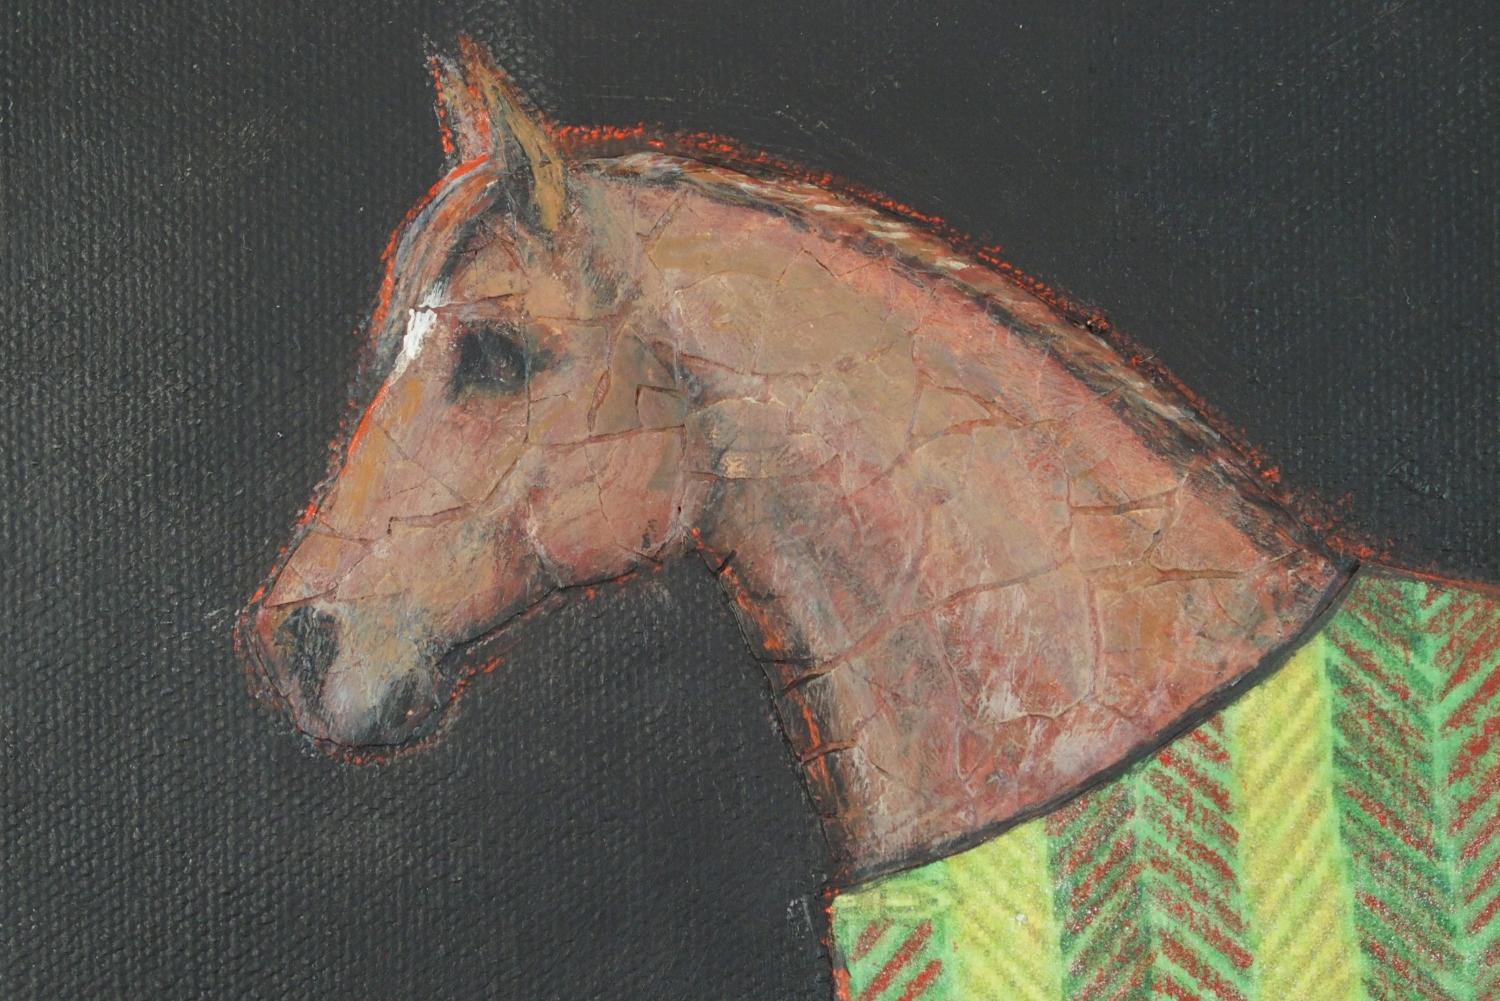 <p>Artist Comments<br>Inspired by antique equestrian portraits, artist Jennifer Ross depicts a chestnut horse wearing a plaid blanket in a stall. The steed grazes in a barn strewn with hay on the floor. Jennifer's unique eggshell and paper collaging